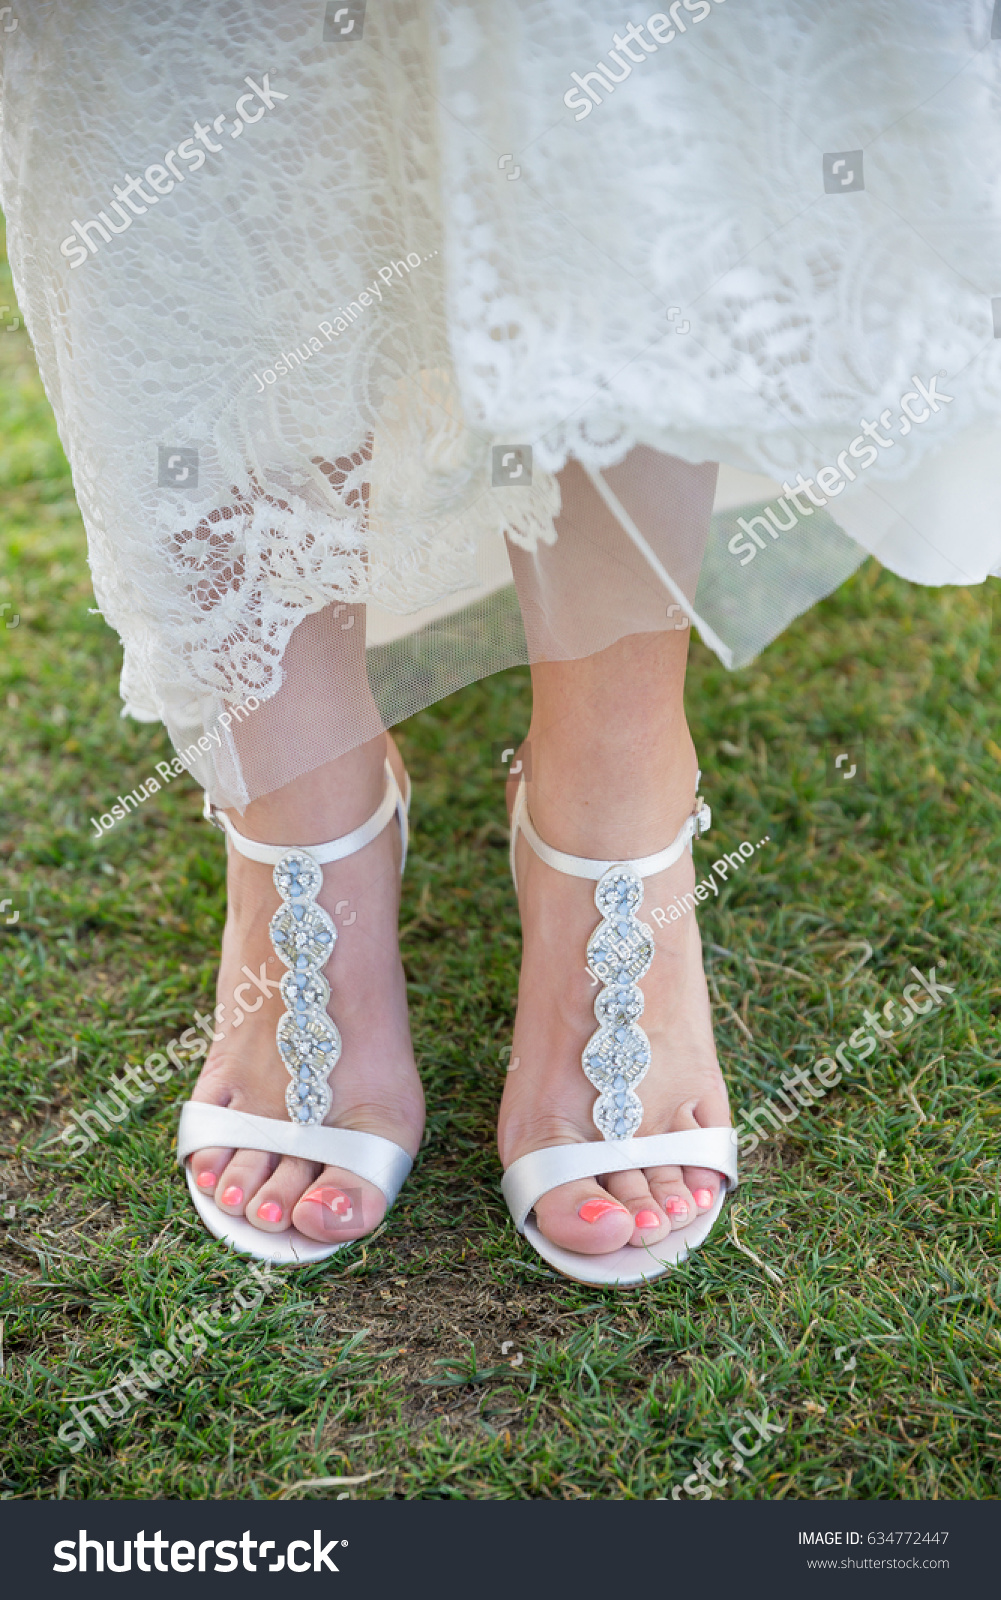 shoes for grass wedding